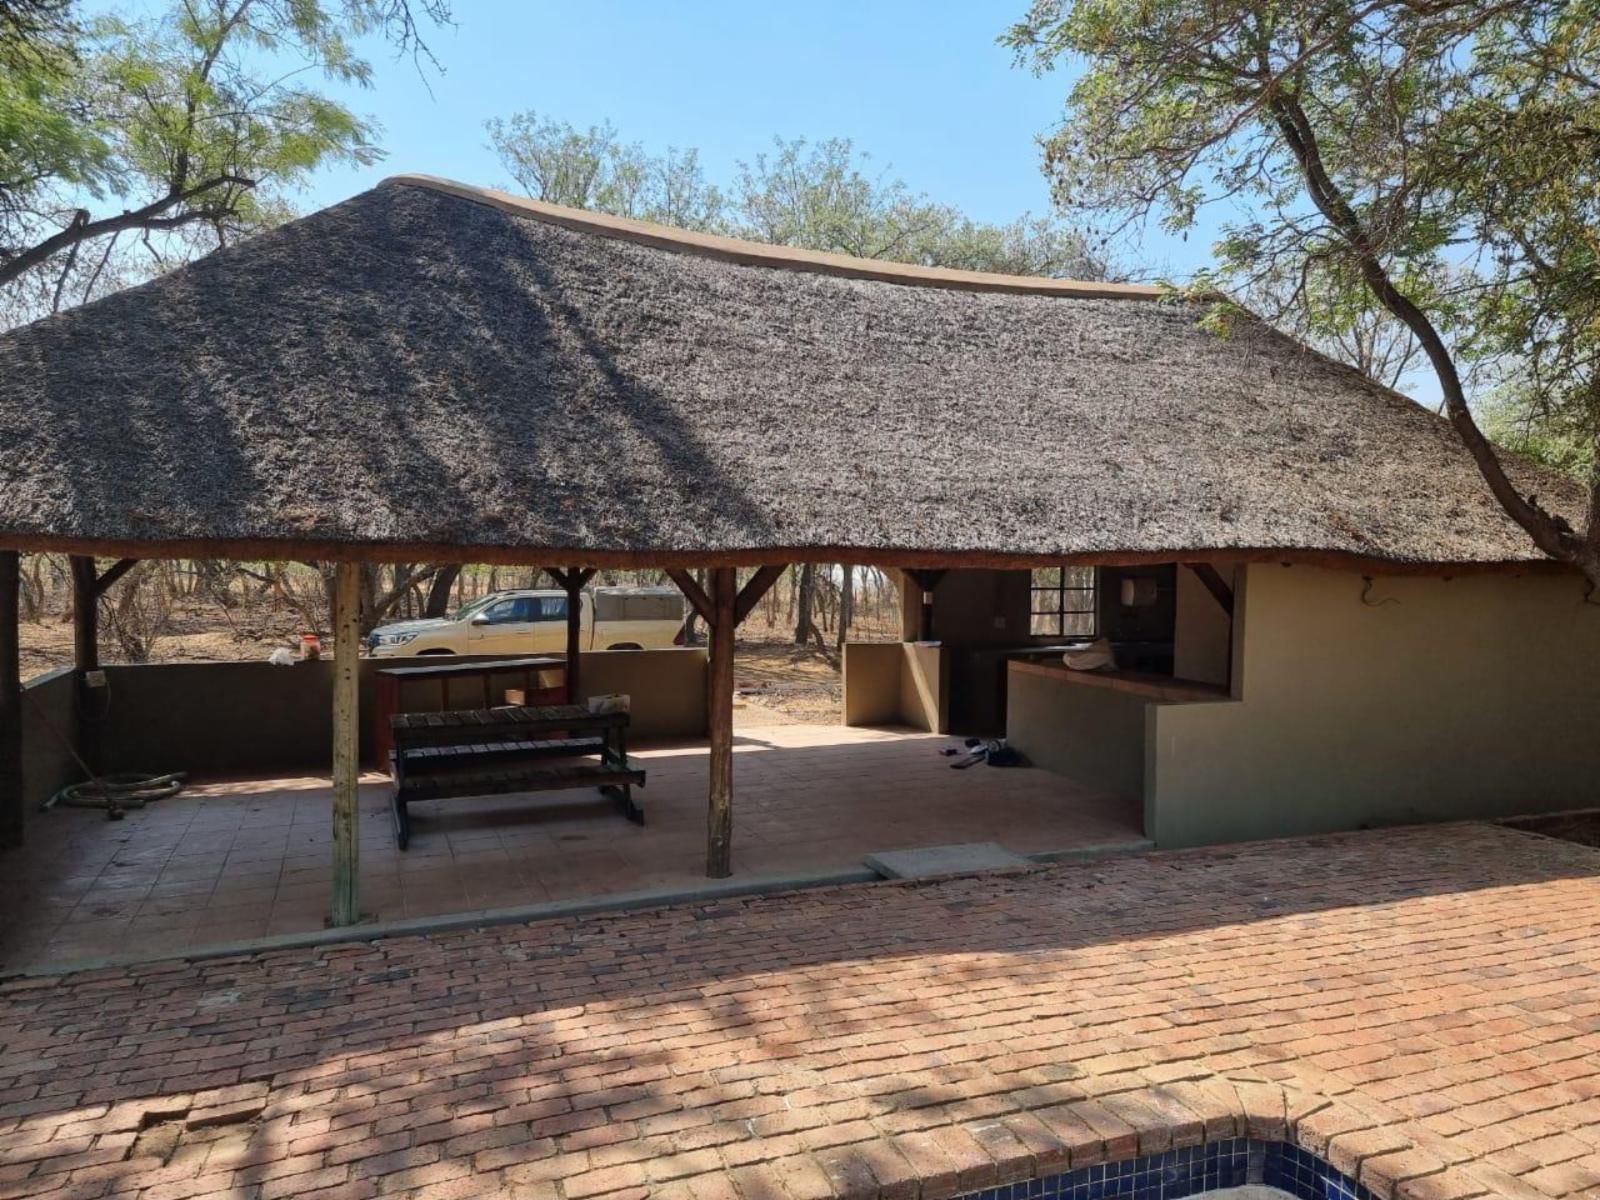 Limpopo Bushveld Retreat Private Campsite Vaalwater Limpopo Province South Africa 